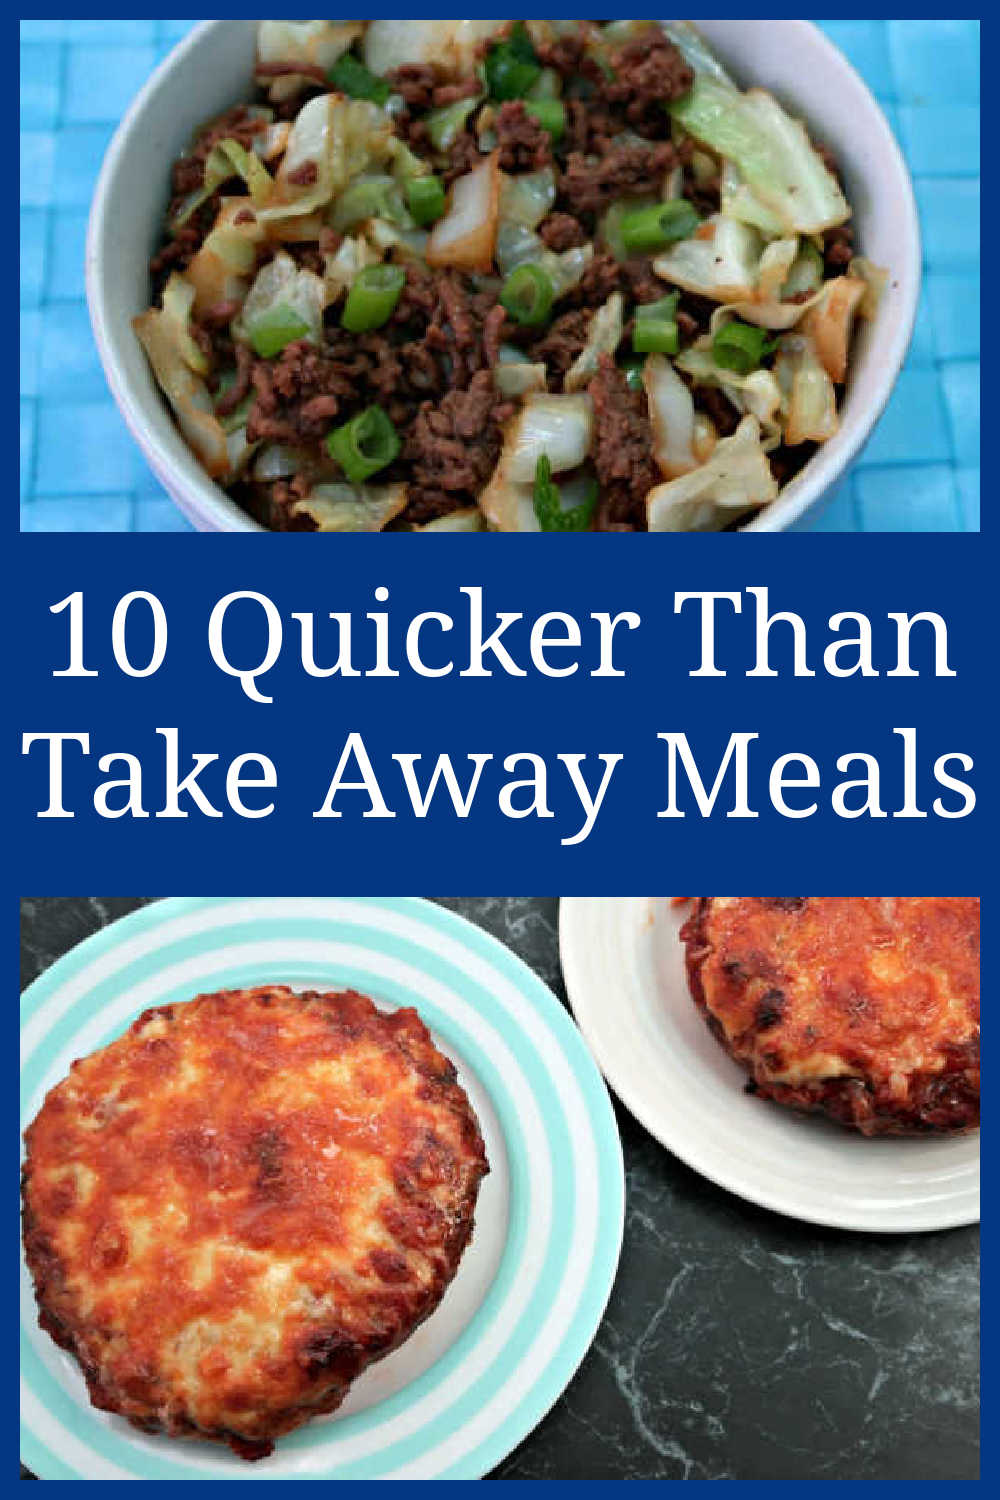 10 Quicker Than Takeaway Meals - Best Recipes for healthy fakeaways - ideas for super fast easy takeout meal alternatives.